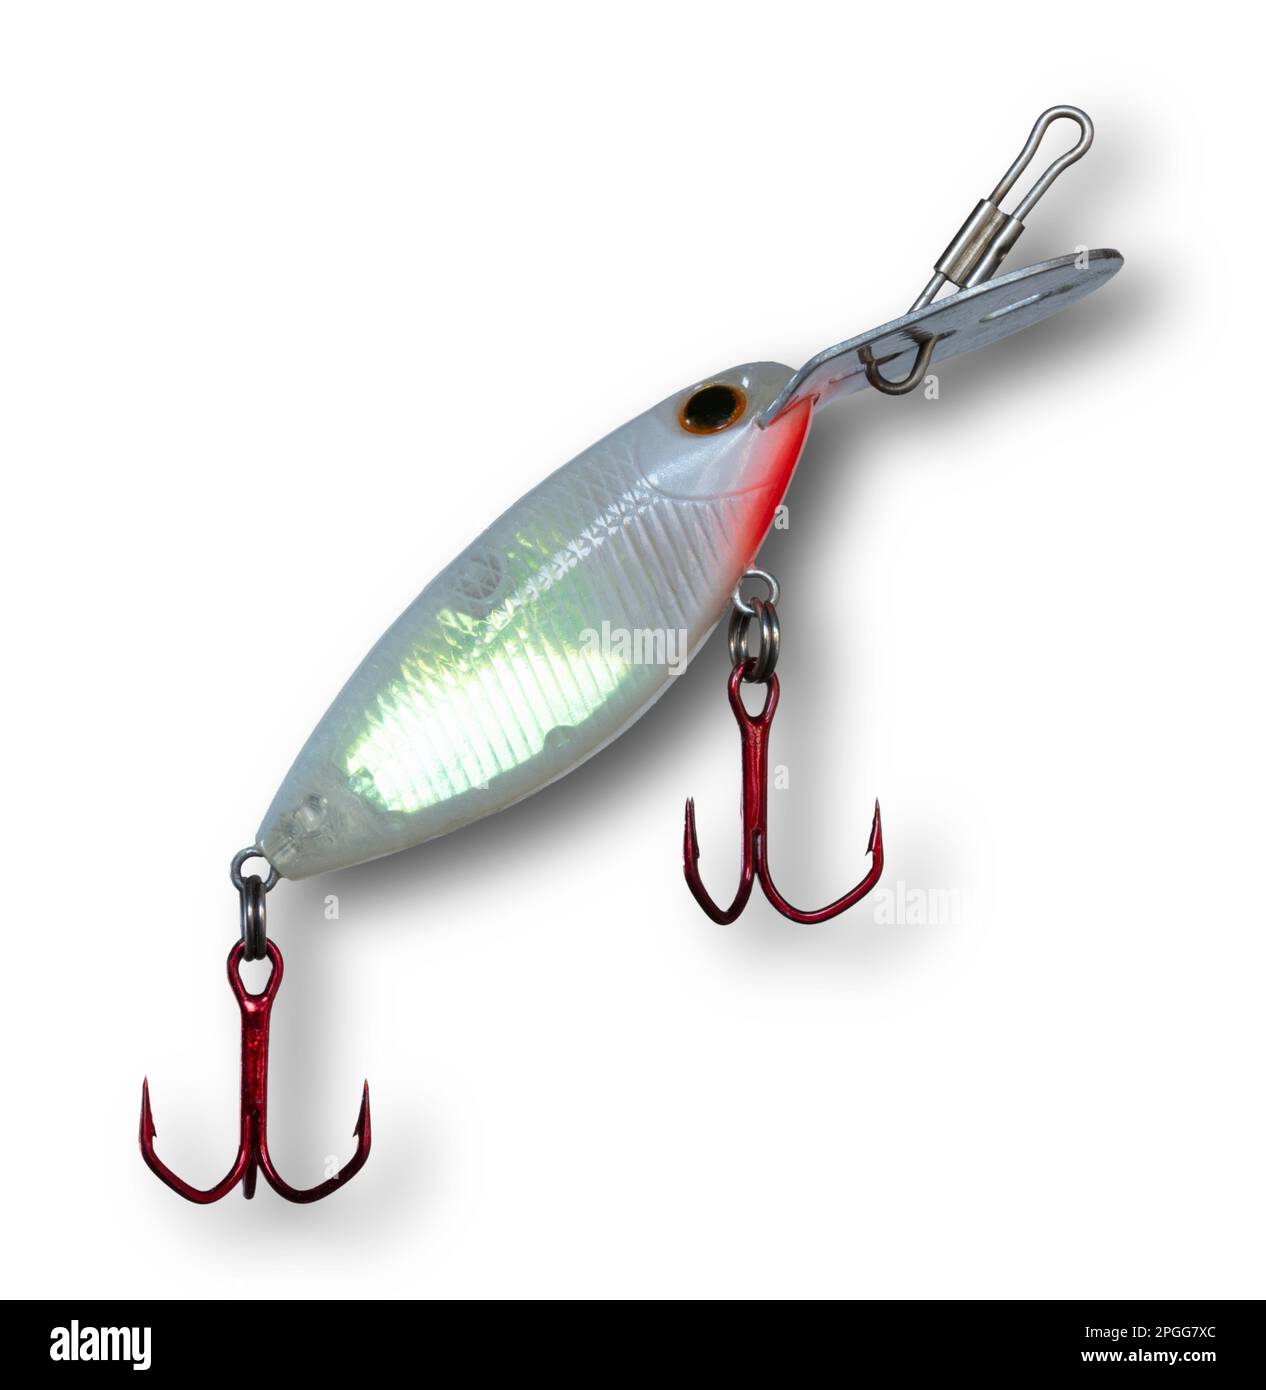 Shadow behind a white artificial fishing crankbait that's white